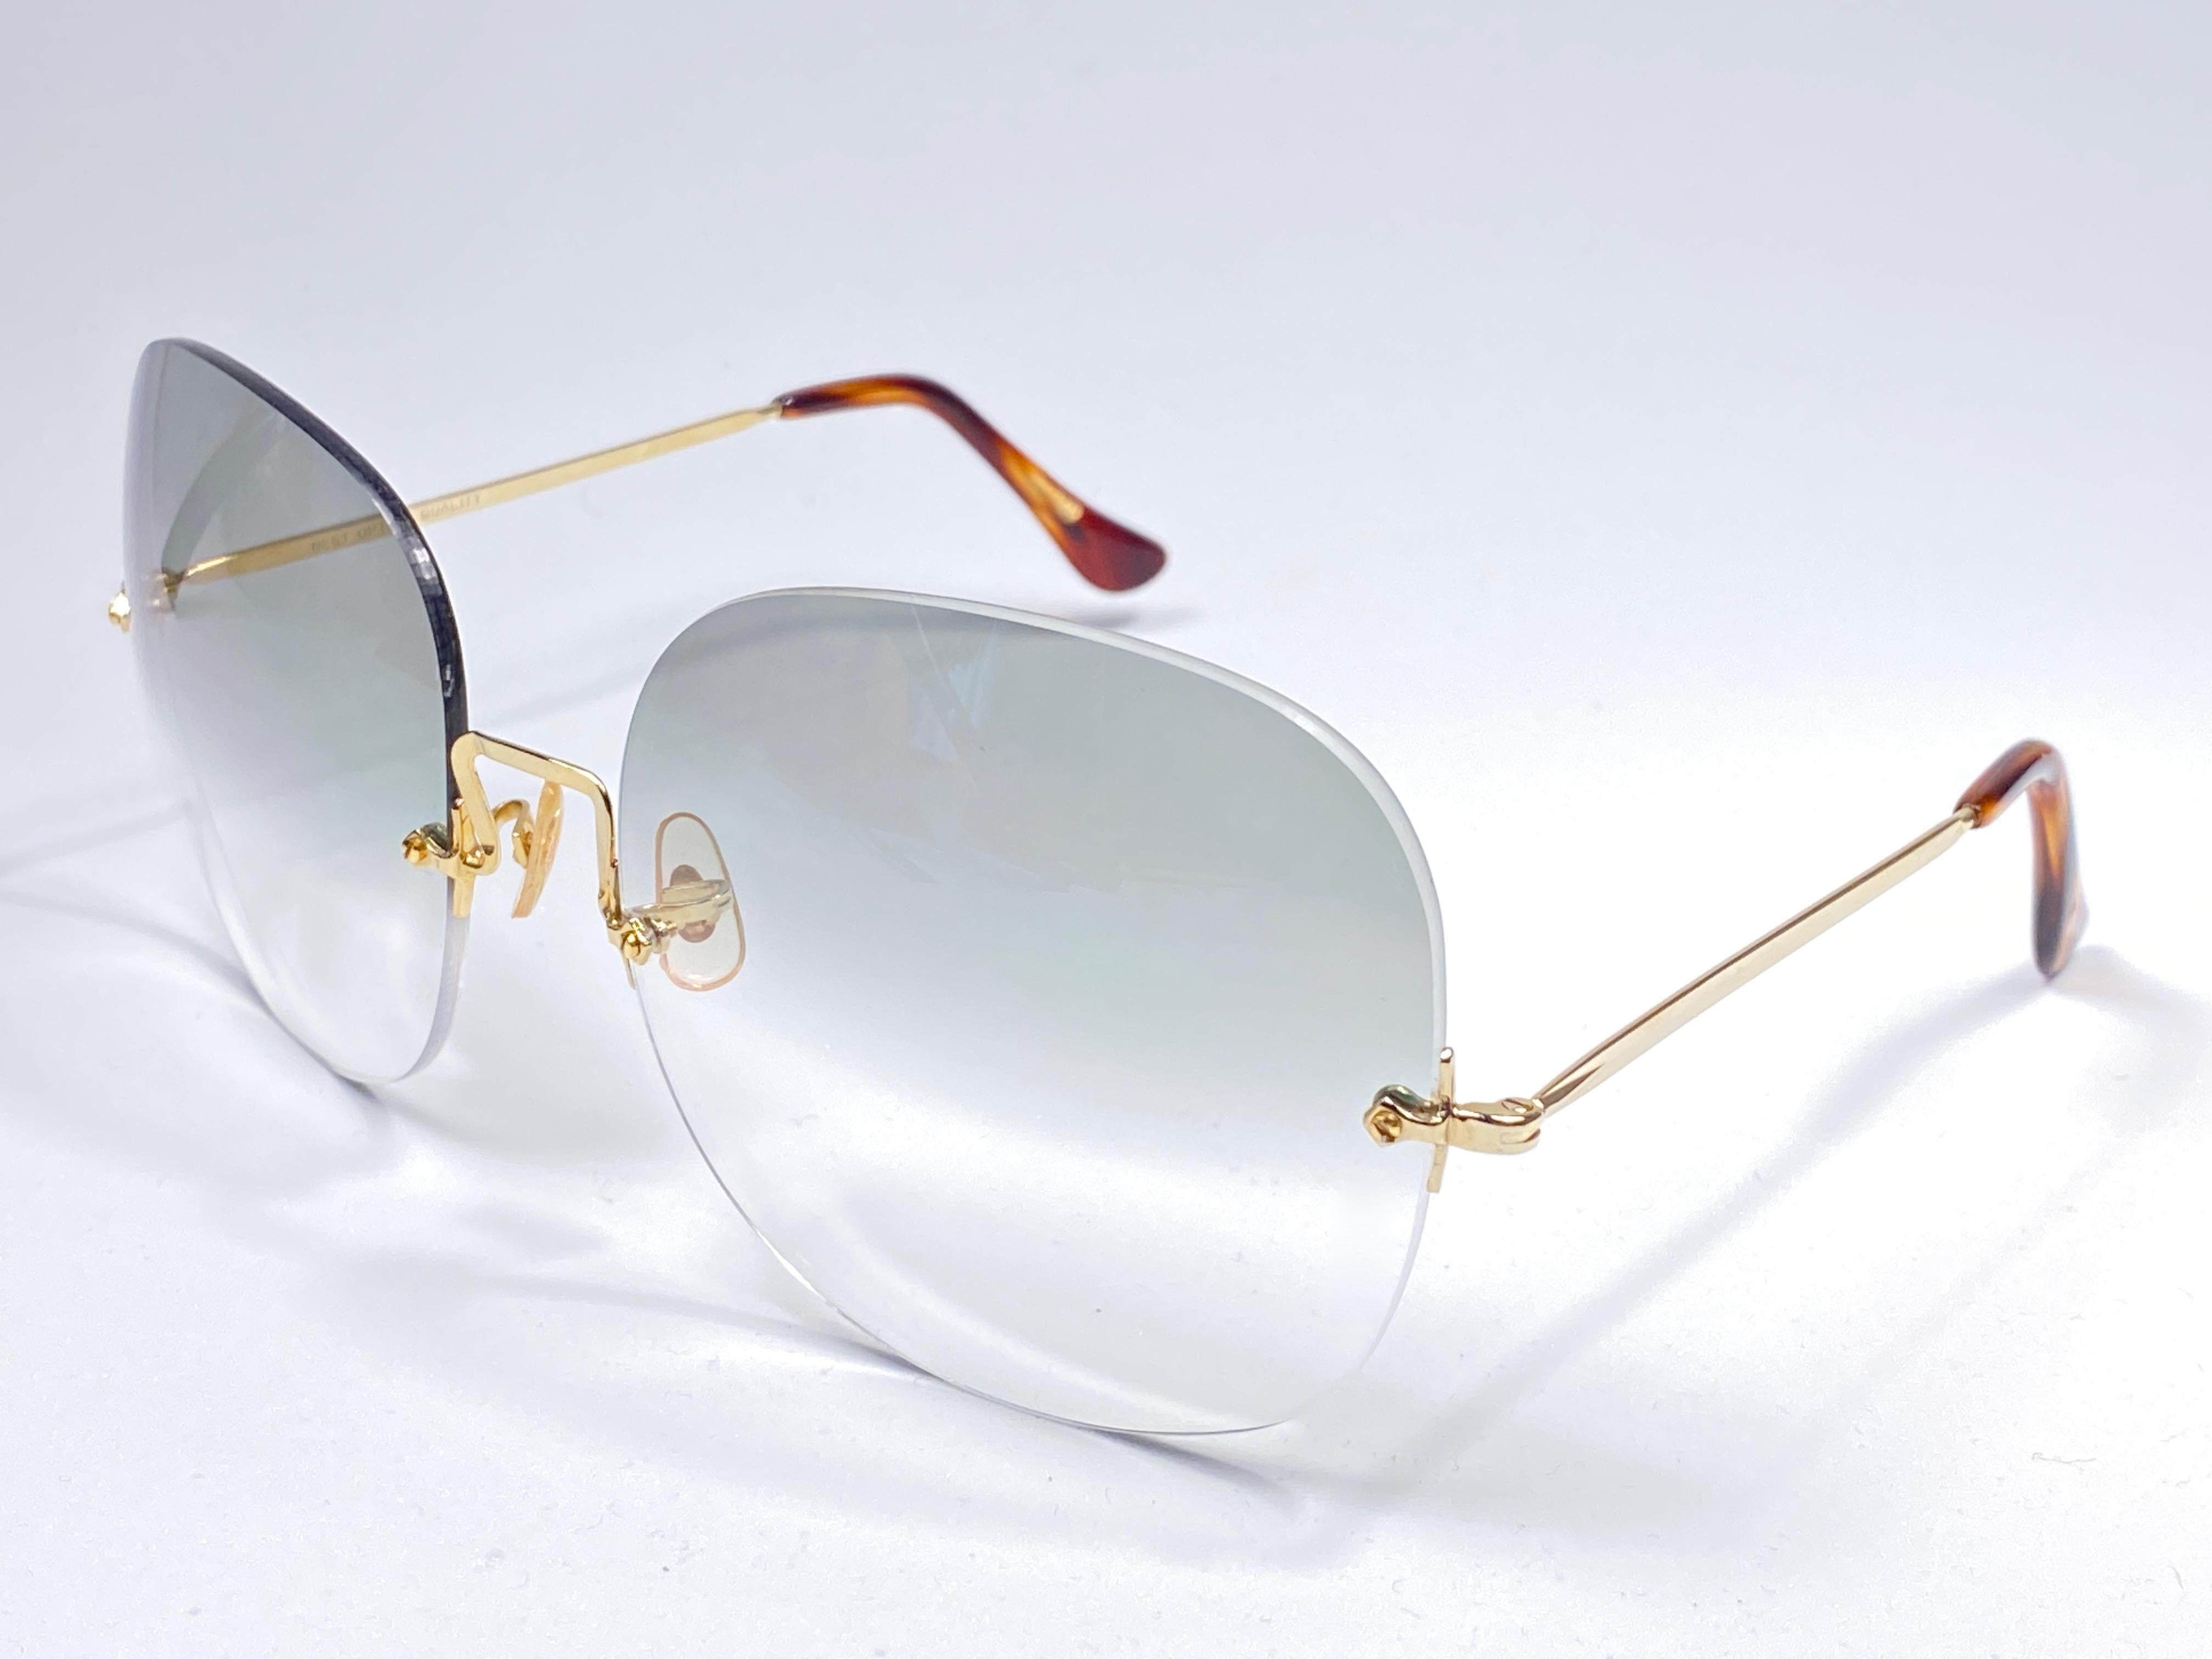 Ultra Tura uber oversized sunglasses circa 1970's by Tura. Silver rimless frame to adapt your prescription lenses.

This is a seldom and rare piece not only for its aesthetic value but for its importance in the sunglasses and fashion history.  